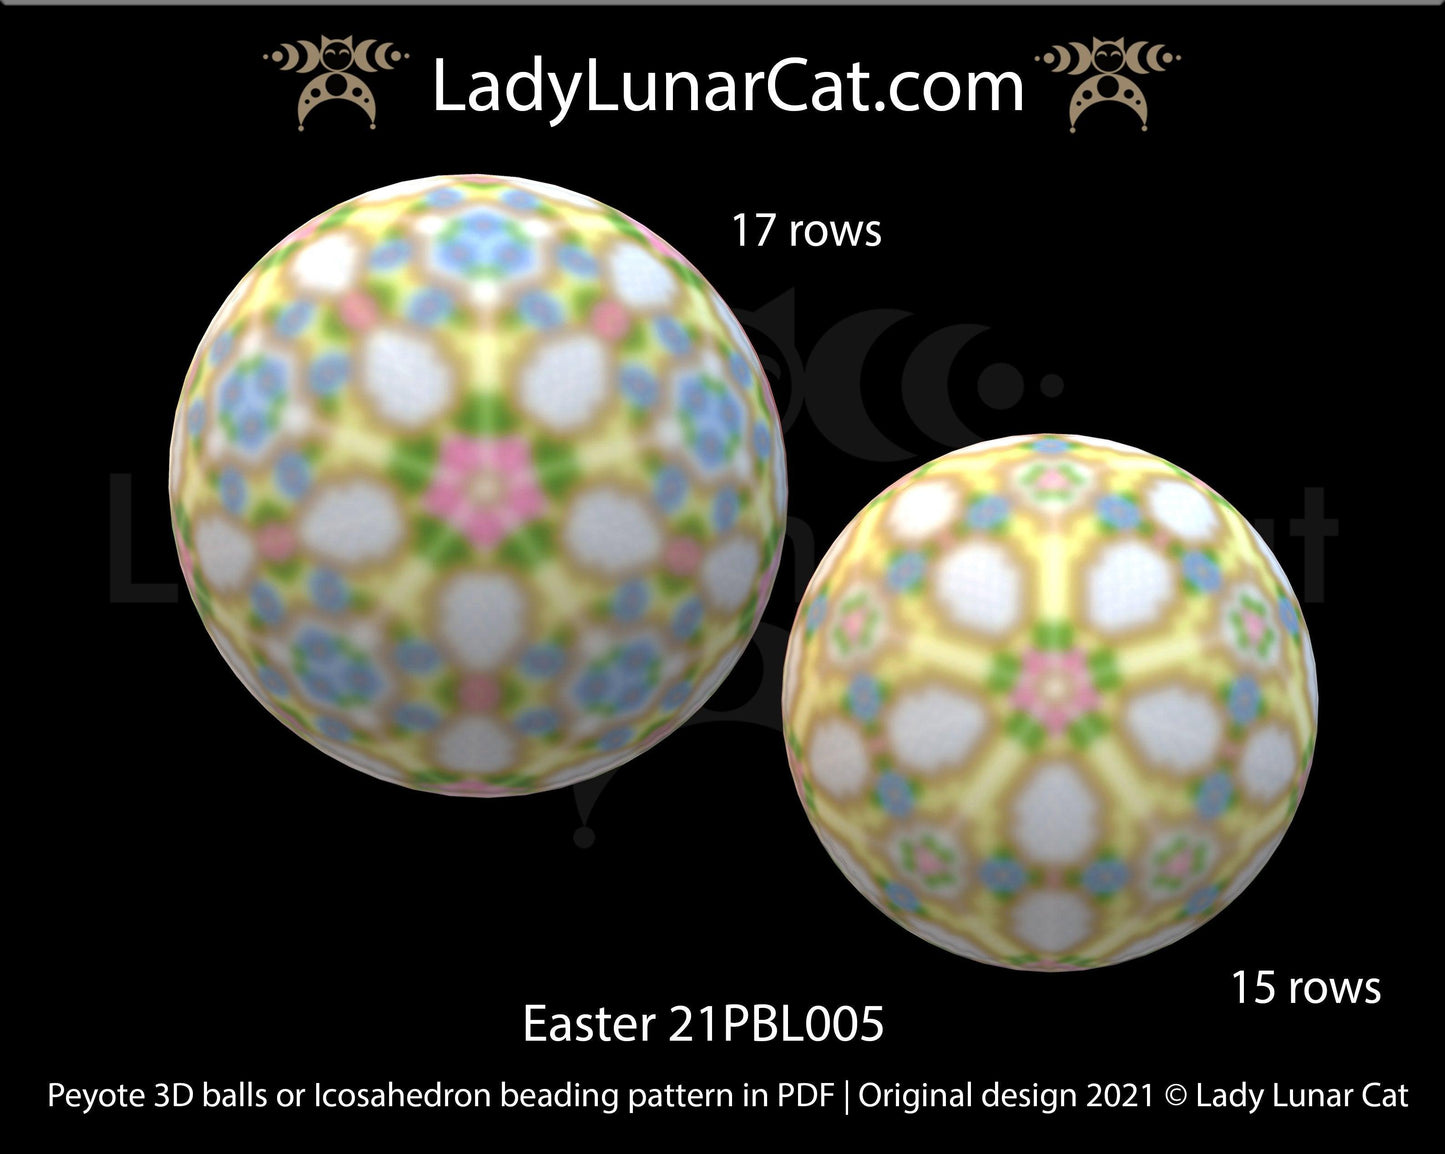 Peyote 3d ball pattern for beading | Beaded Icosahedron Easter 21PBL005 17/15 rows LadyLunarCat